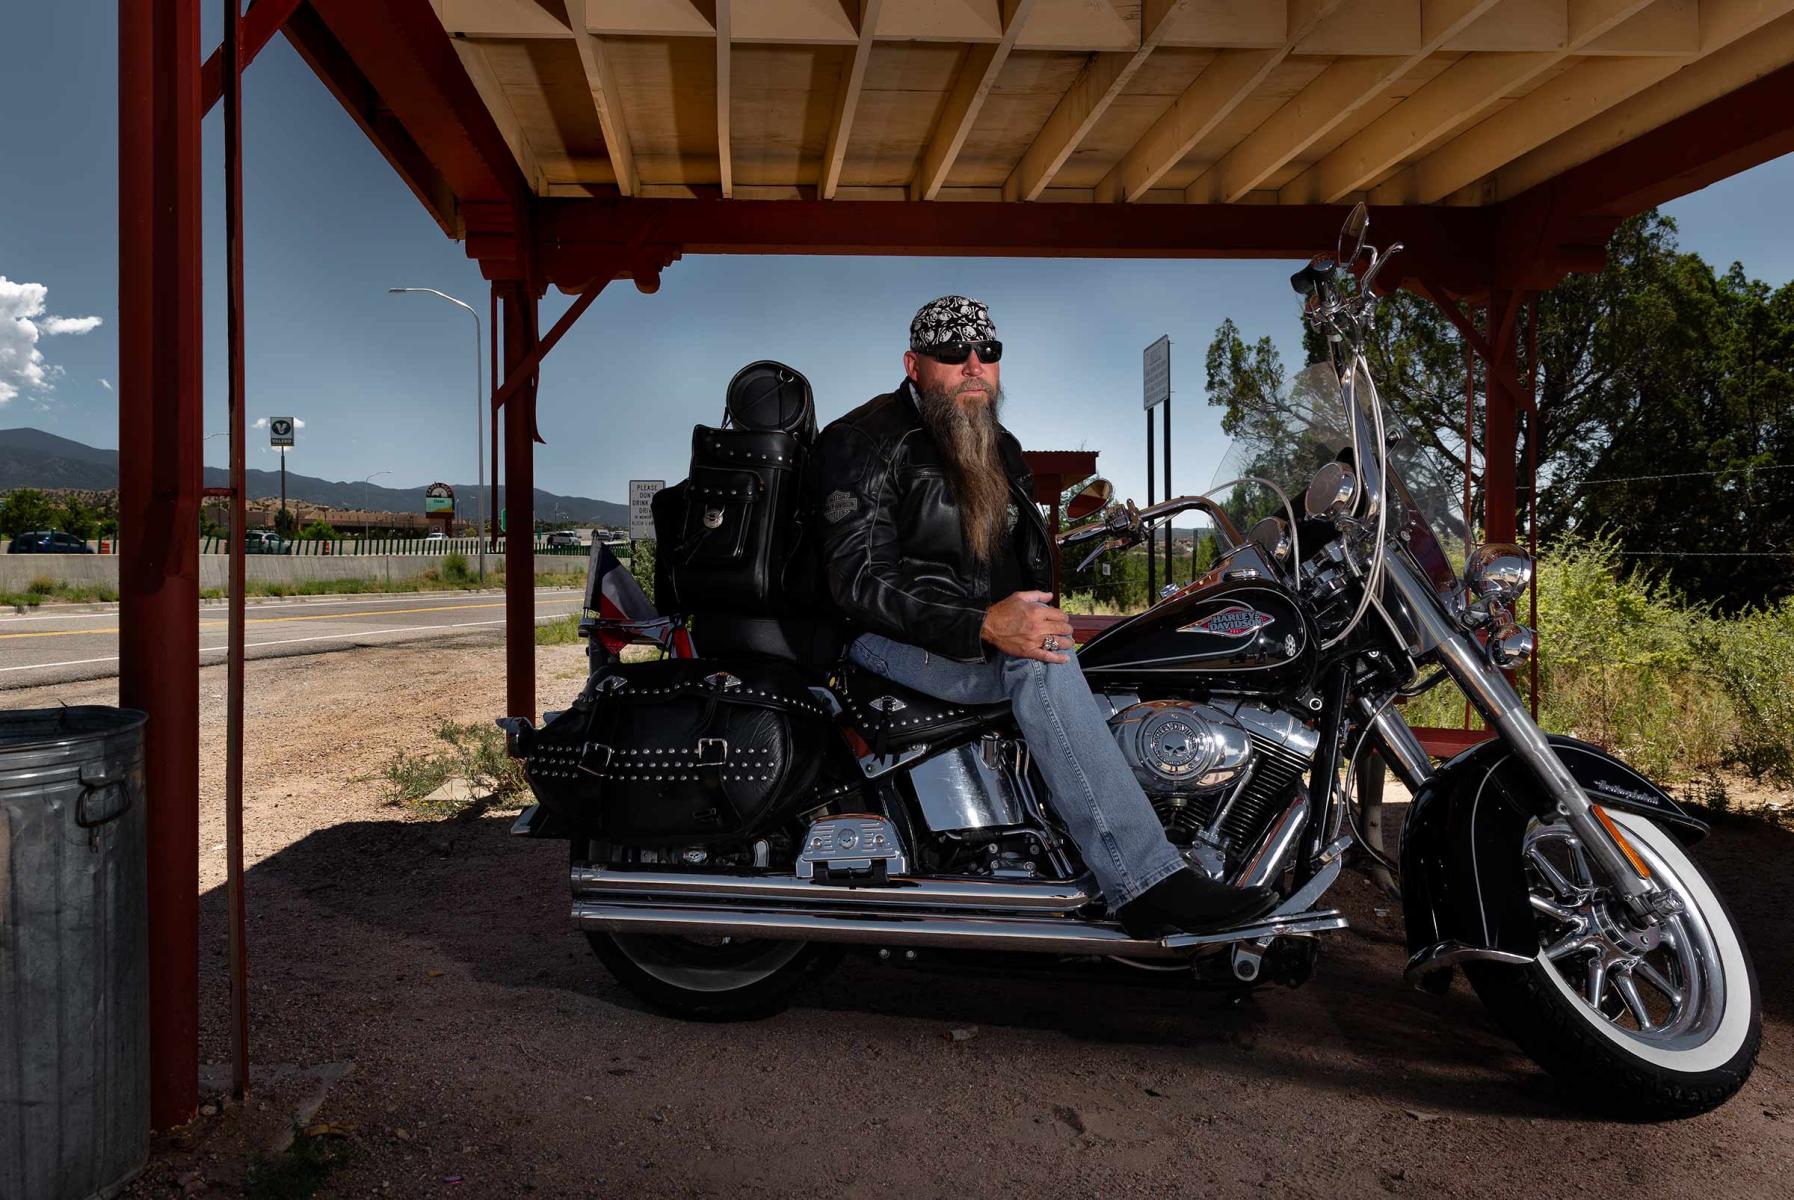 On route from Sante Fe to Alamaso meet a biker from Galvaston, Texas.
We talked about travels though America. : Visiting Mom : New York City portrait photographer